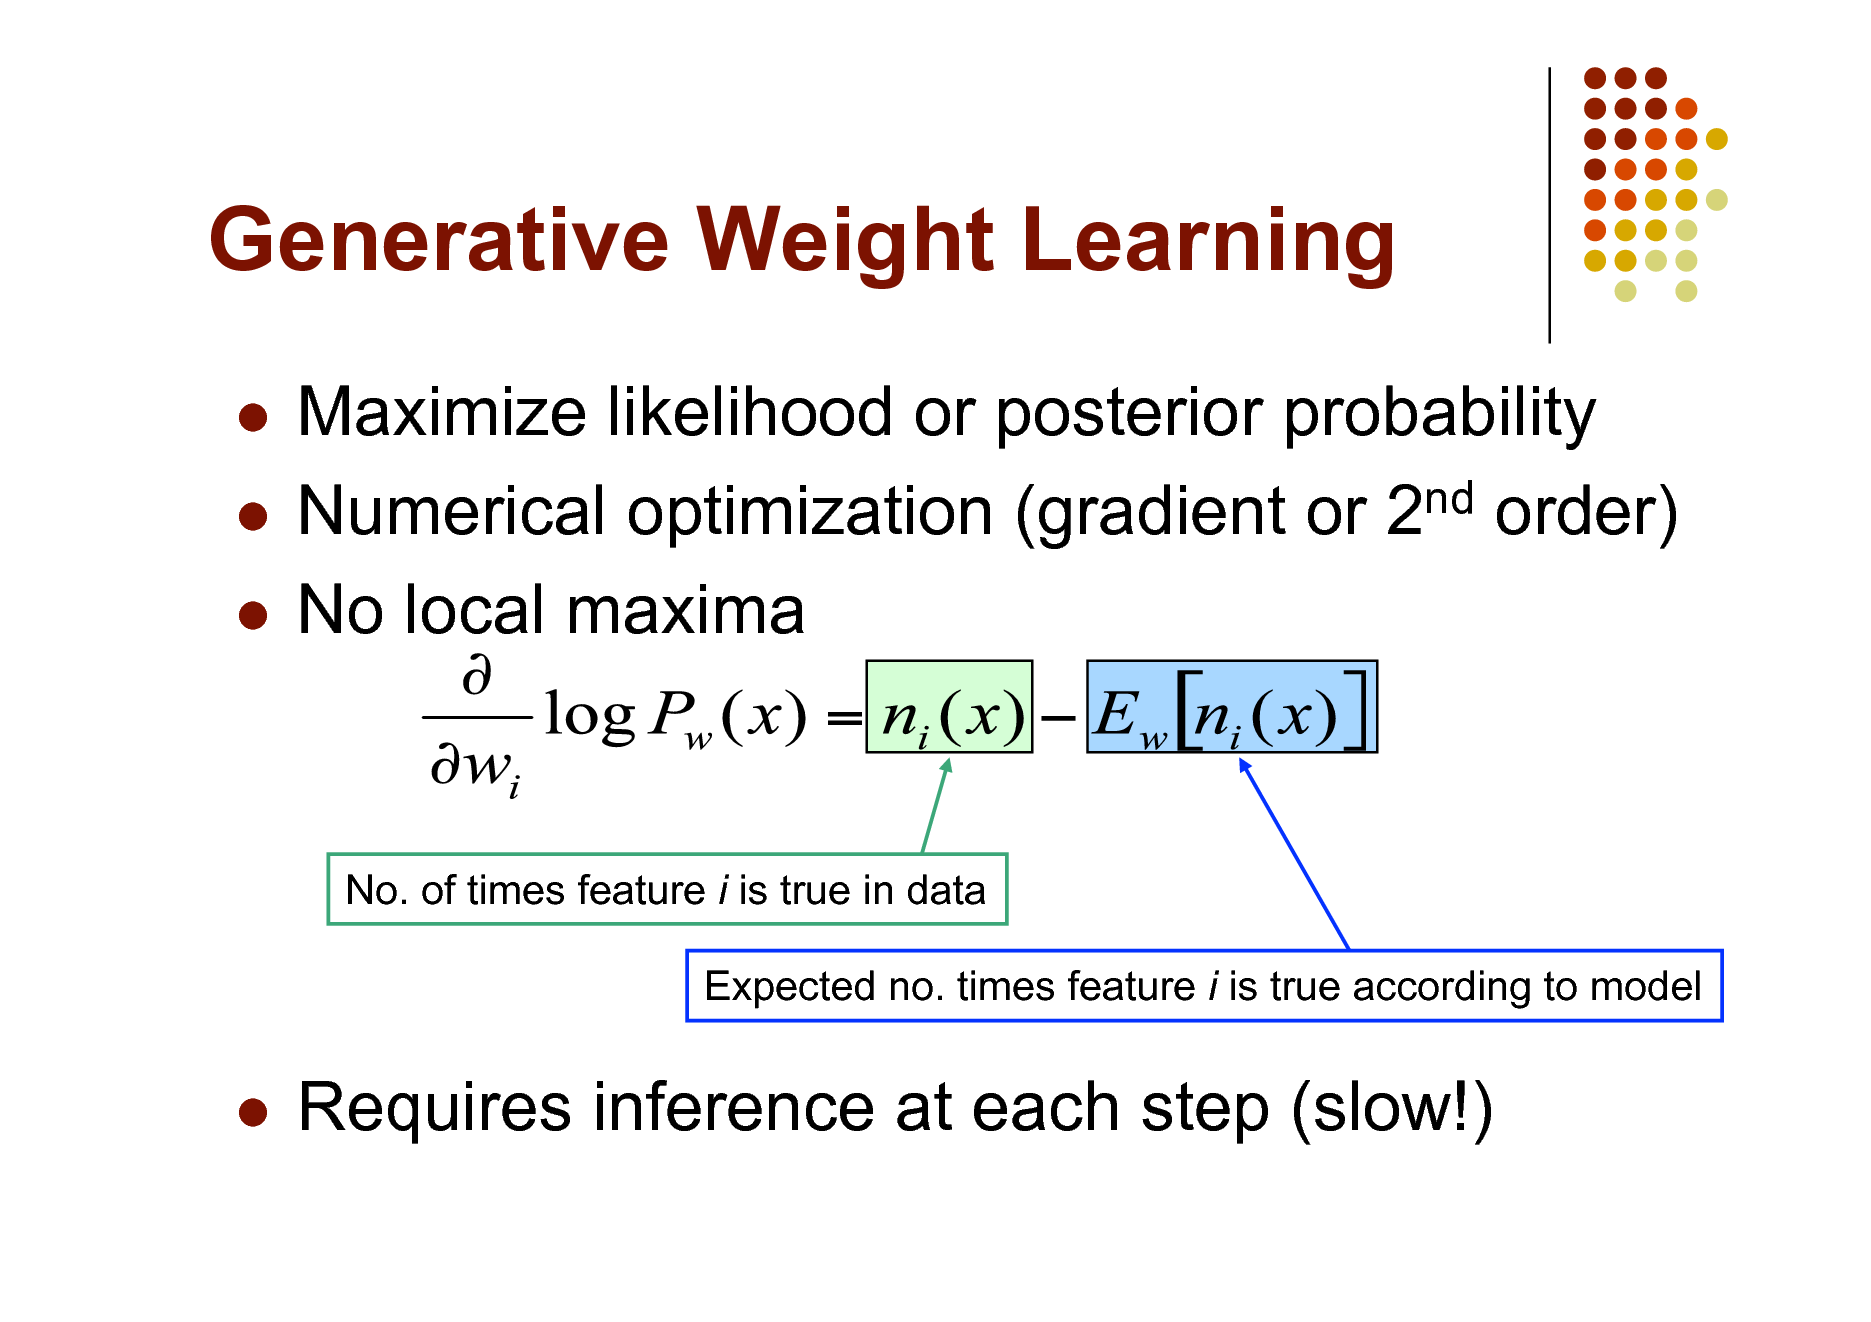 Slide: Generative Weight Learning
Maximize likelihood or posterior probability  Numerical optimization (gradient or 2nd order)  No local maxima


No. of times feature i is true in data Expected no. times feature i is true according to model



Requires inference at each step (slow!)

